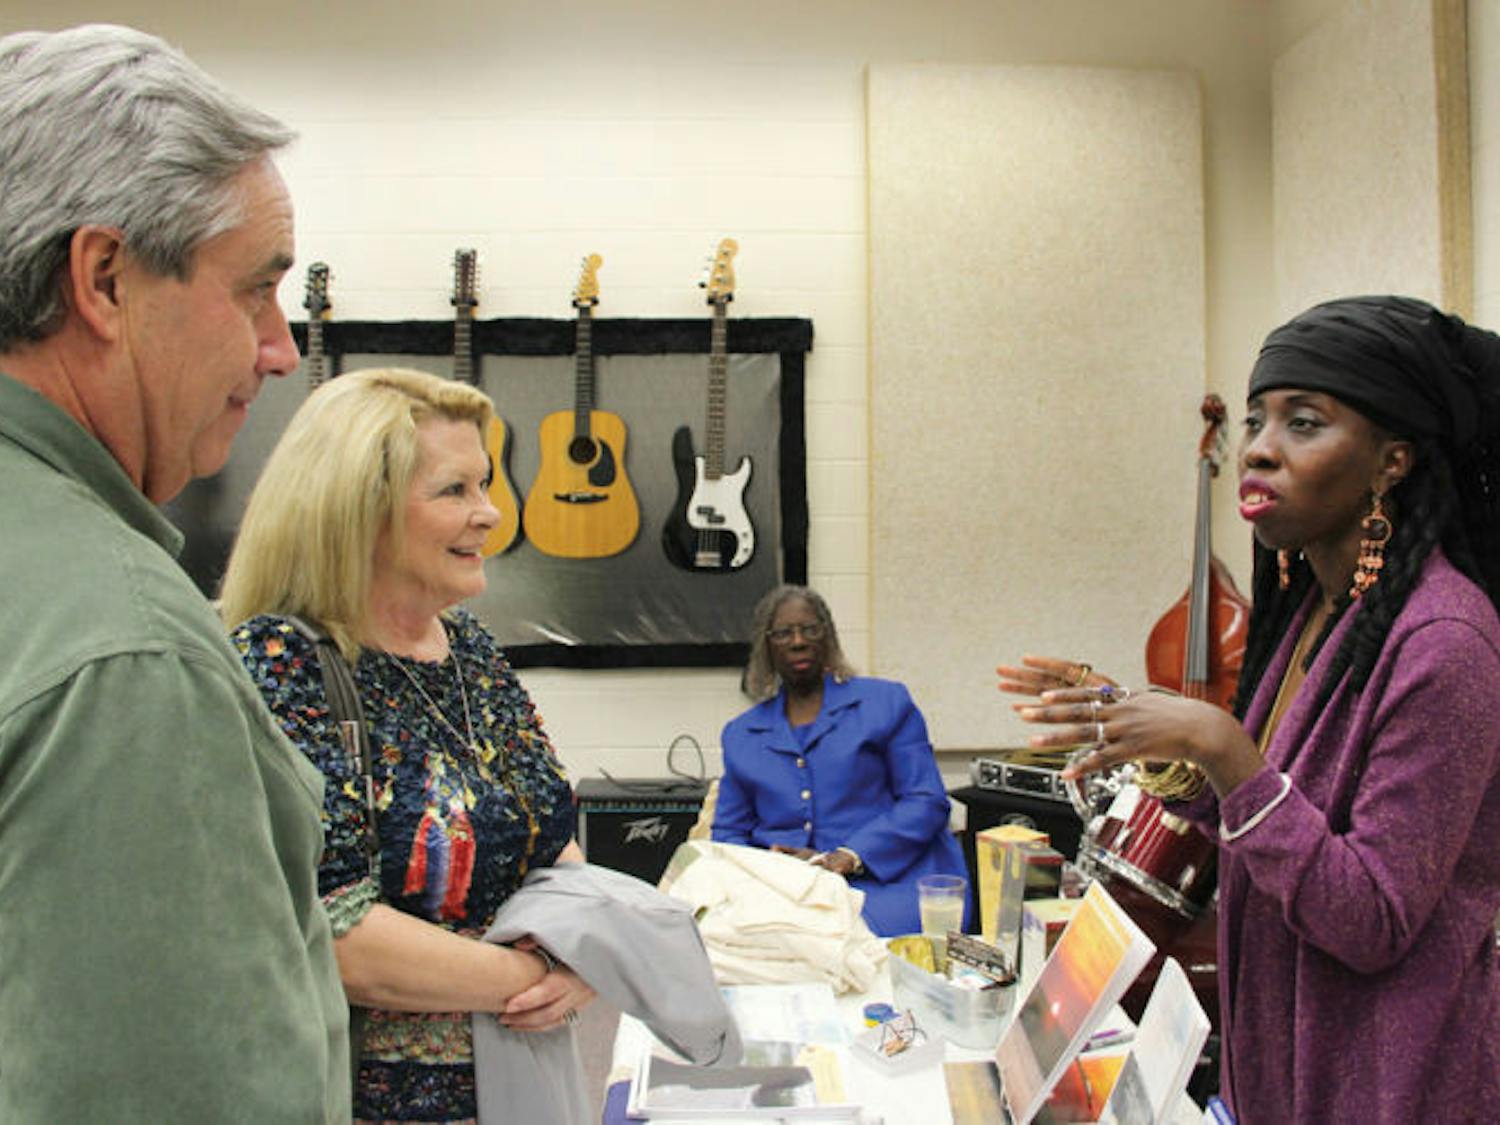 Queen Quet, head-of-state for the Gullah/Geechee nation, speaks with Headmaster of Oak Hall School Richard Gehman and his wife, Vicki, during her visit to Gainesville on Friday. Her visit was part of the Gullah/Geechee Land &amp; Legacy World Tour to promote the group’s contributions to society.